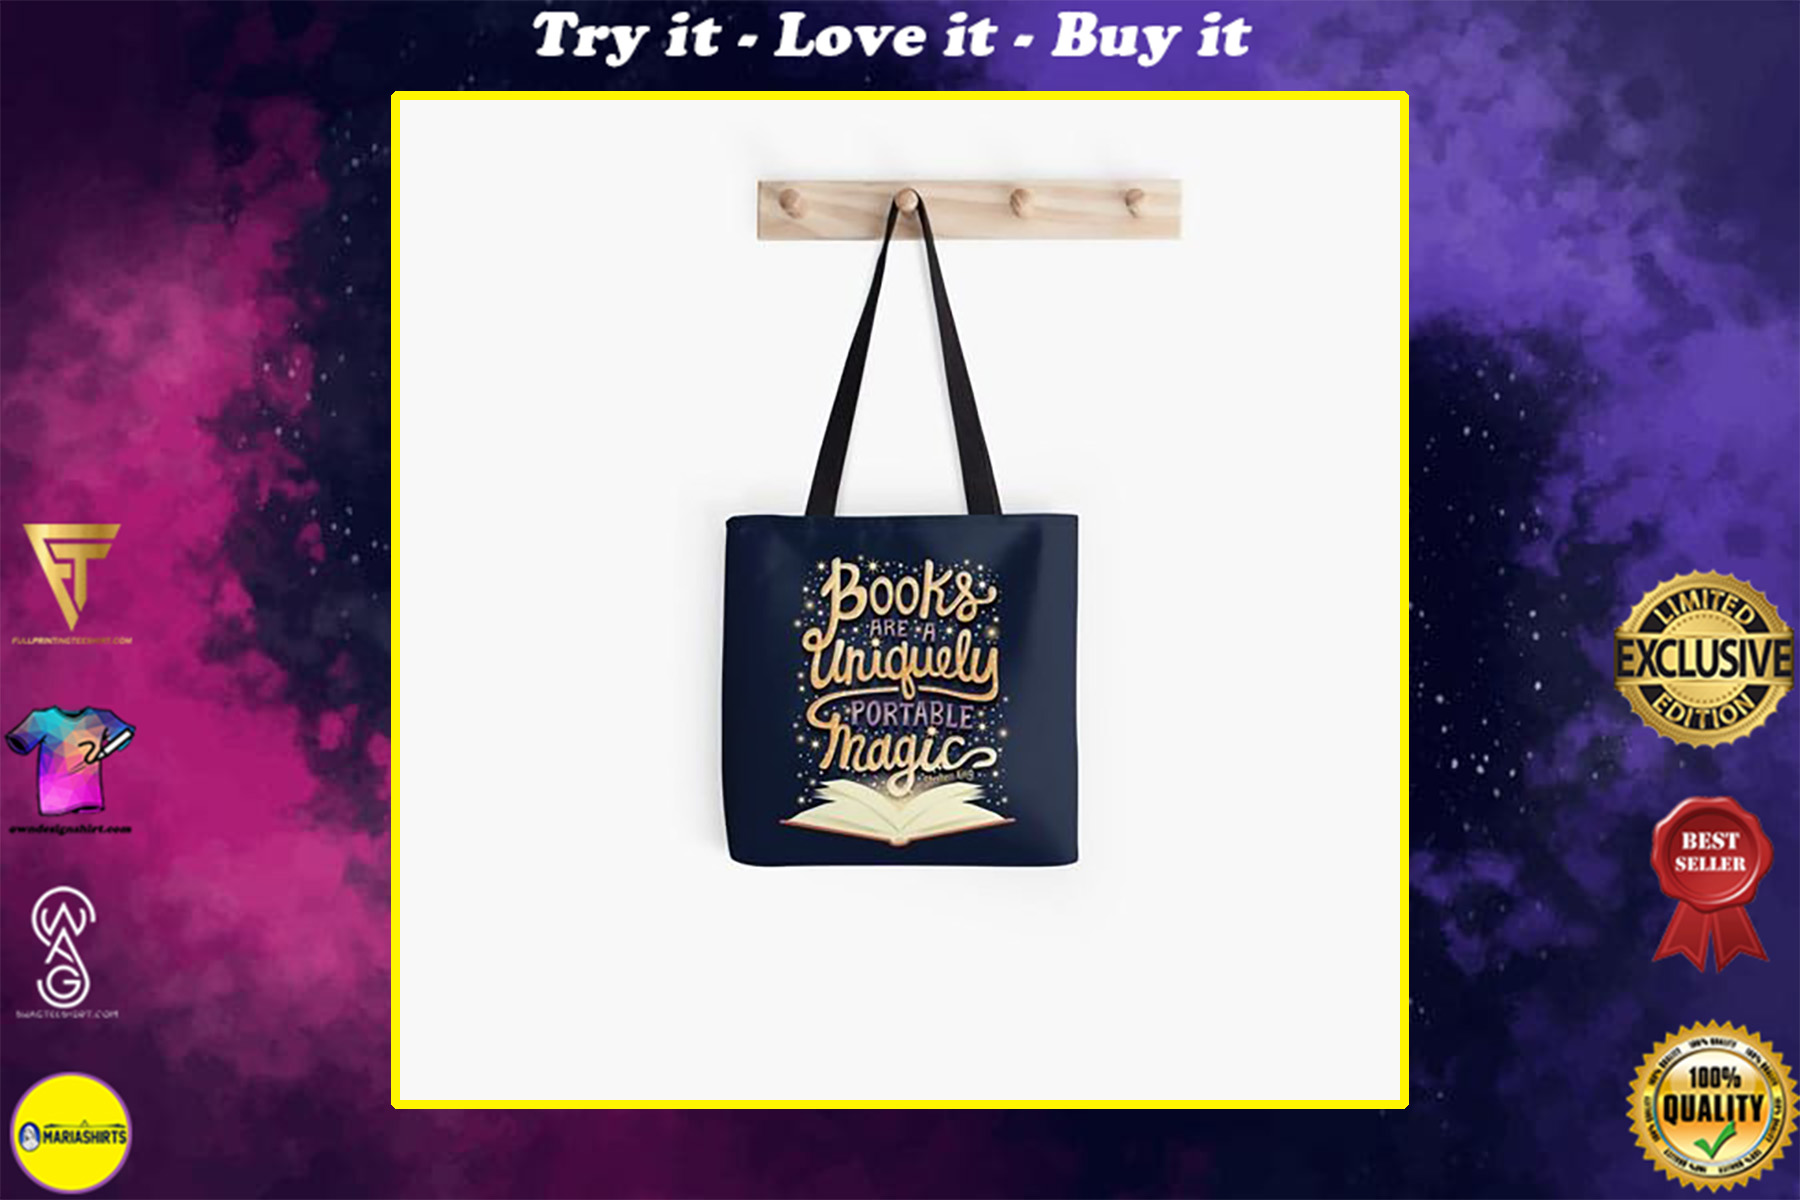 book lovers reading books are a uniquely portable magic all over printed tote bag